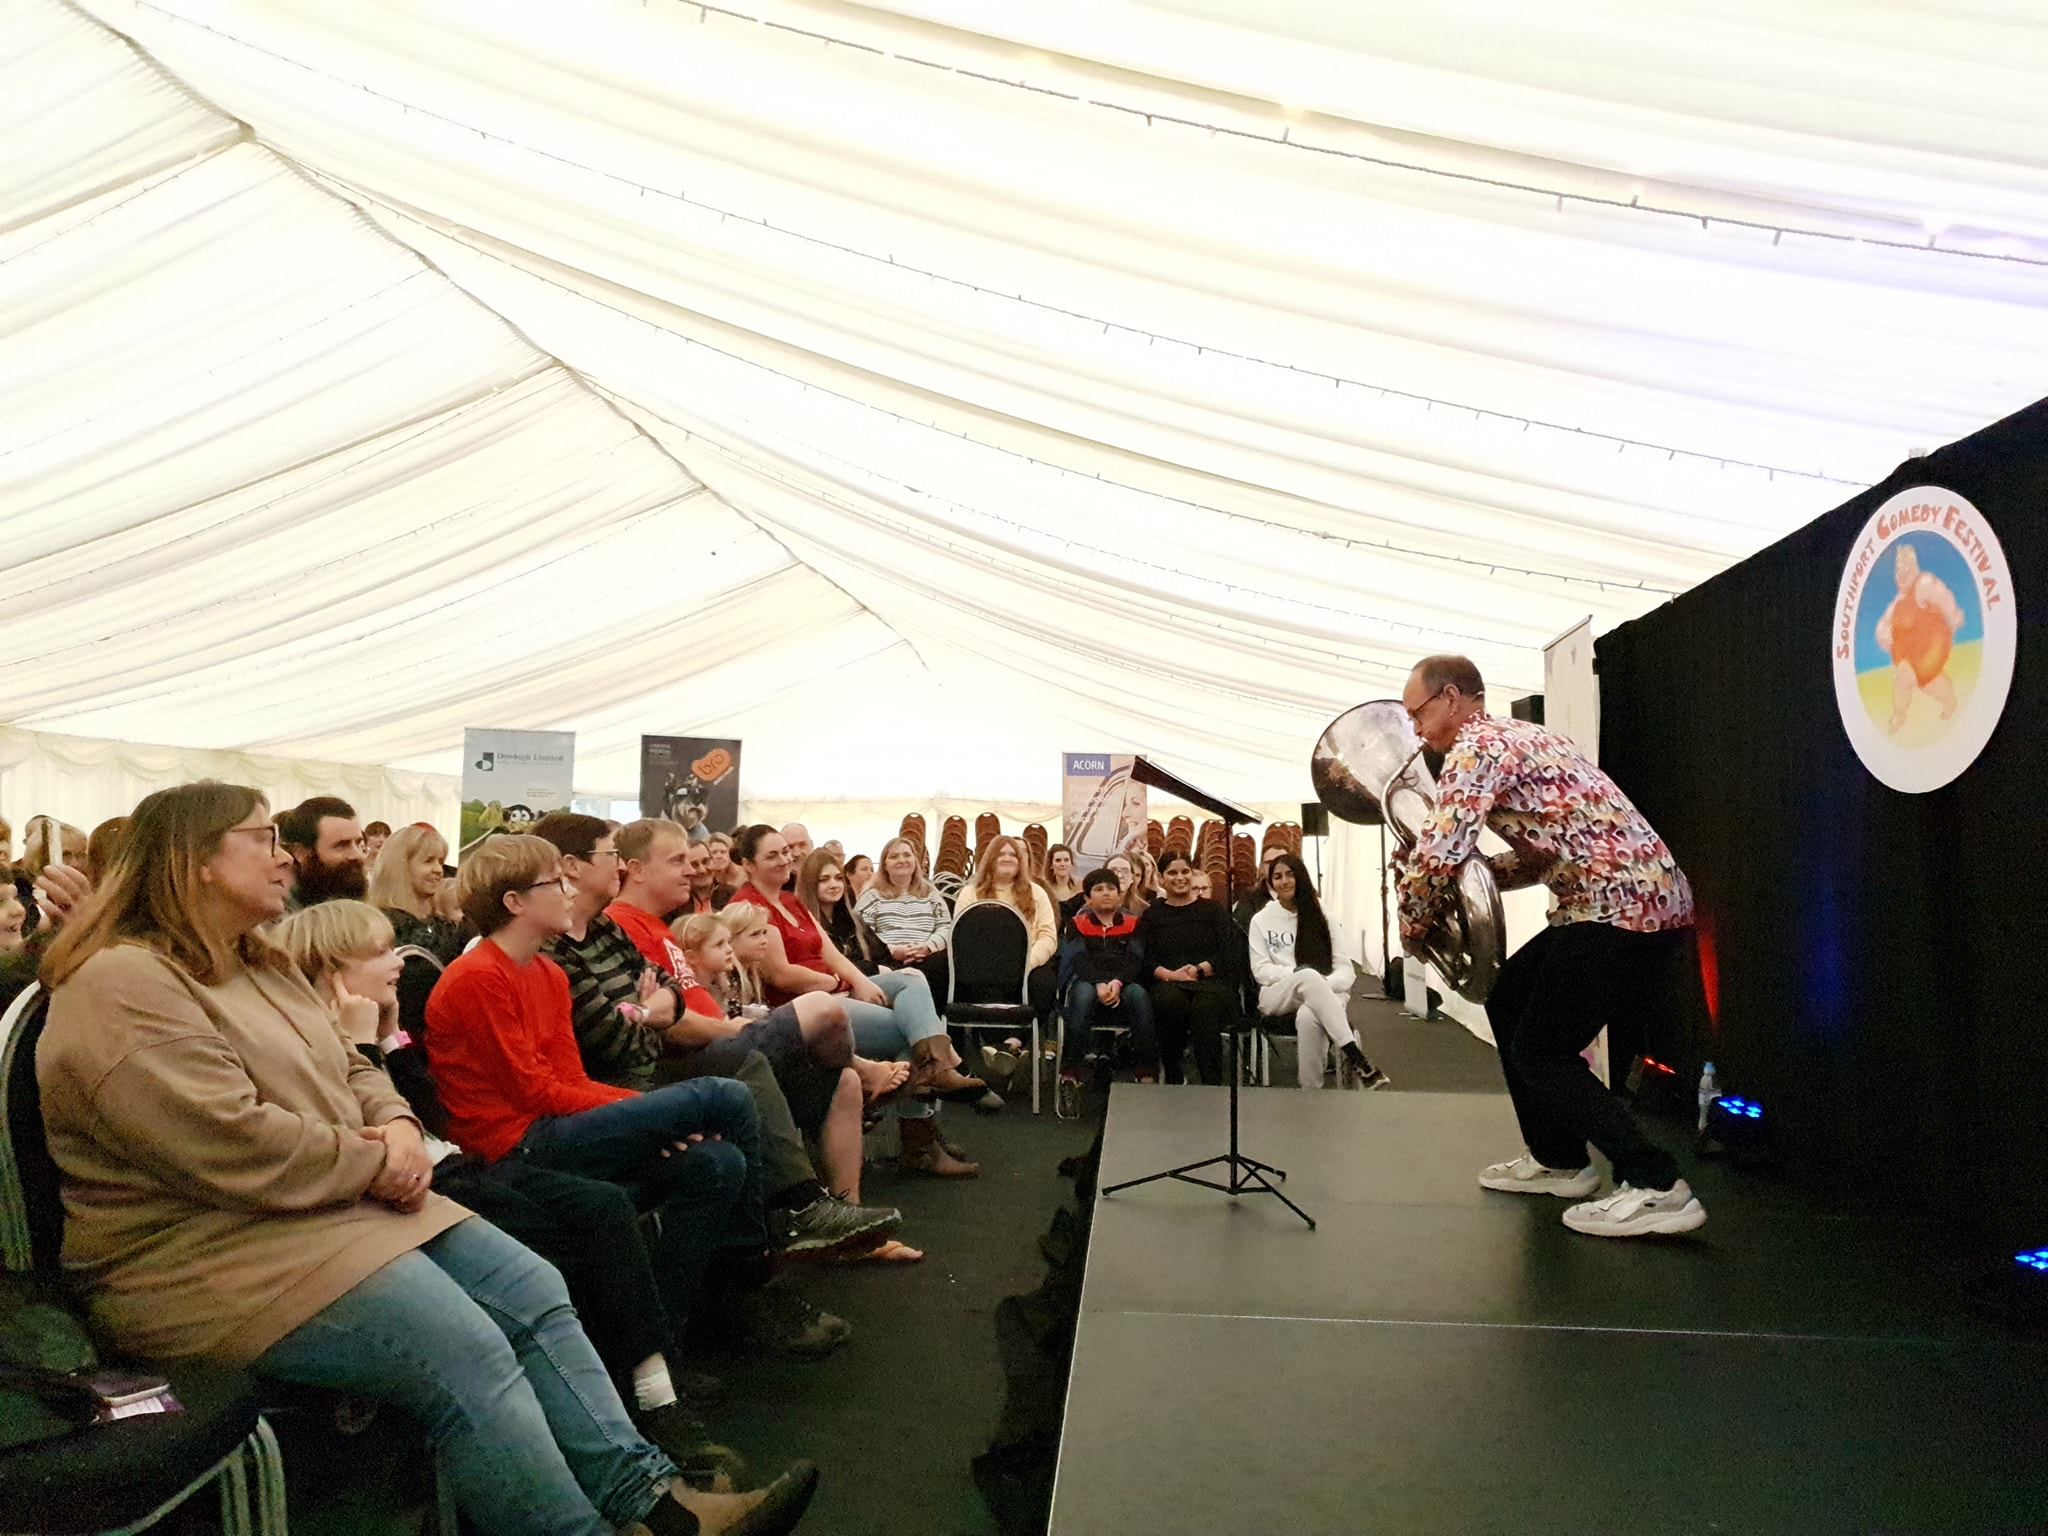 Steve Royel performs at Southport Comedy Festival in a marquee provided by Elite Marquees